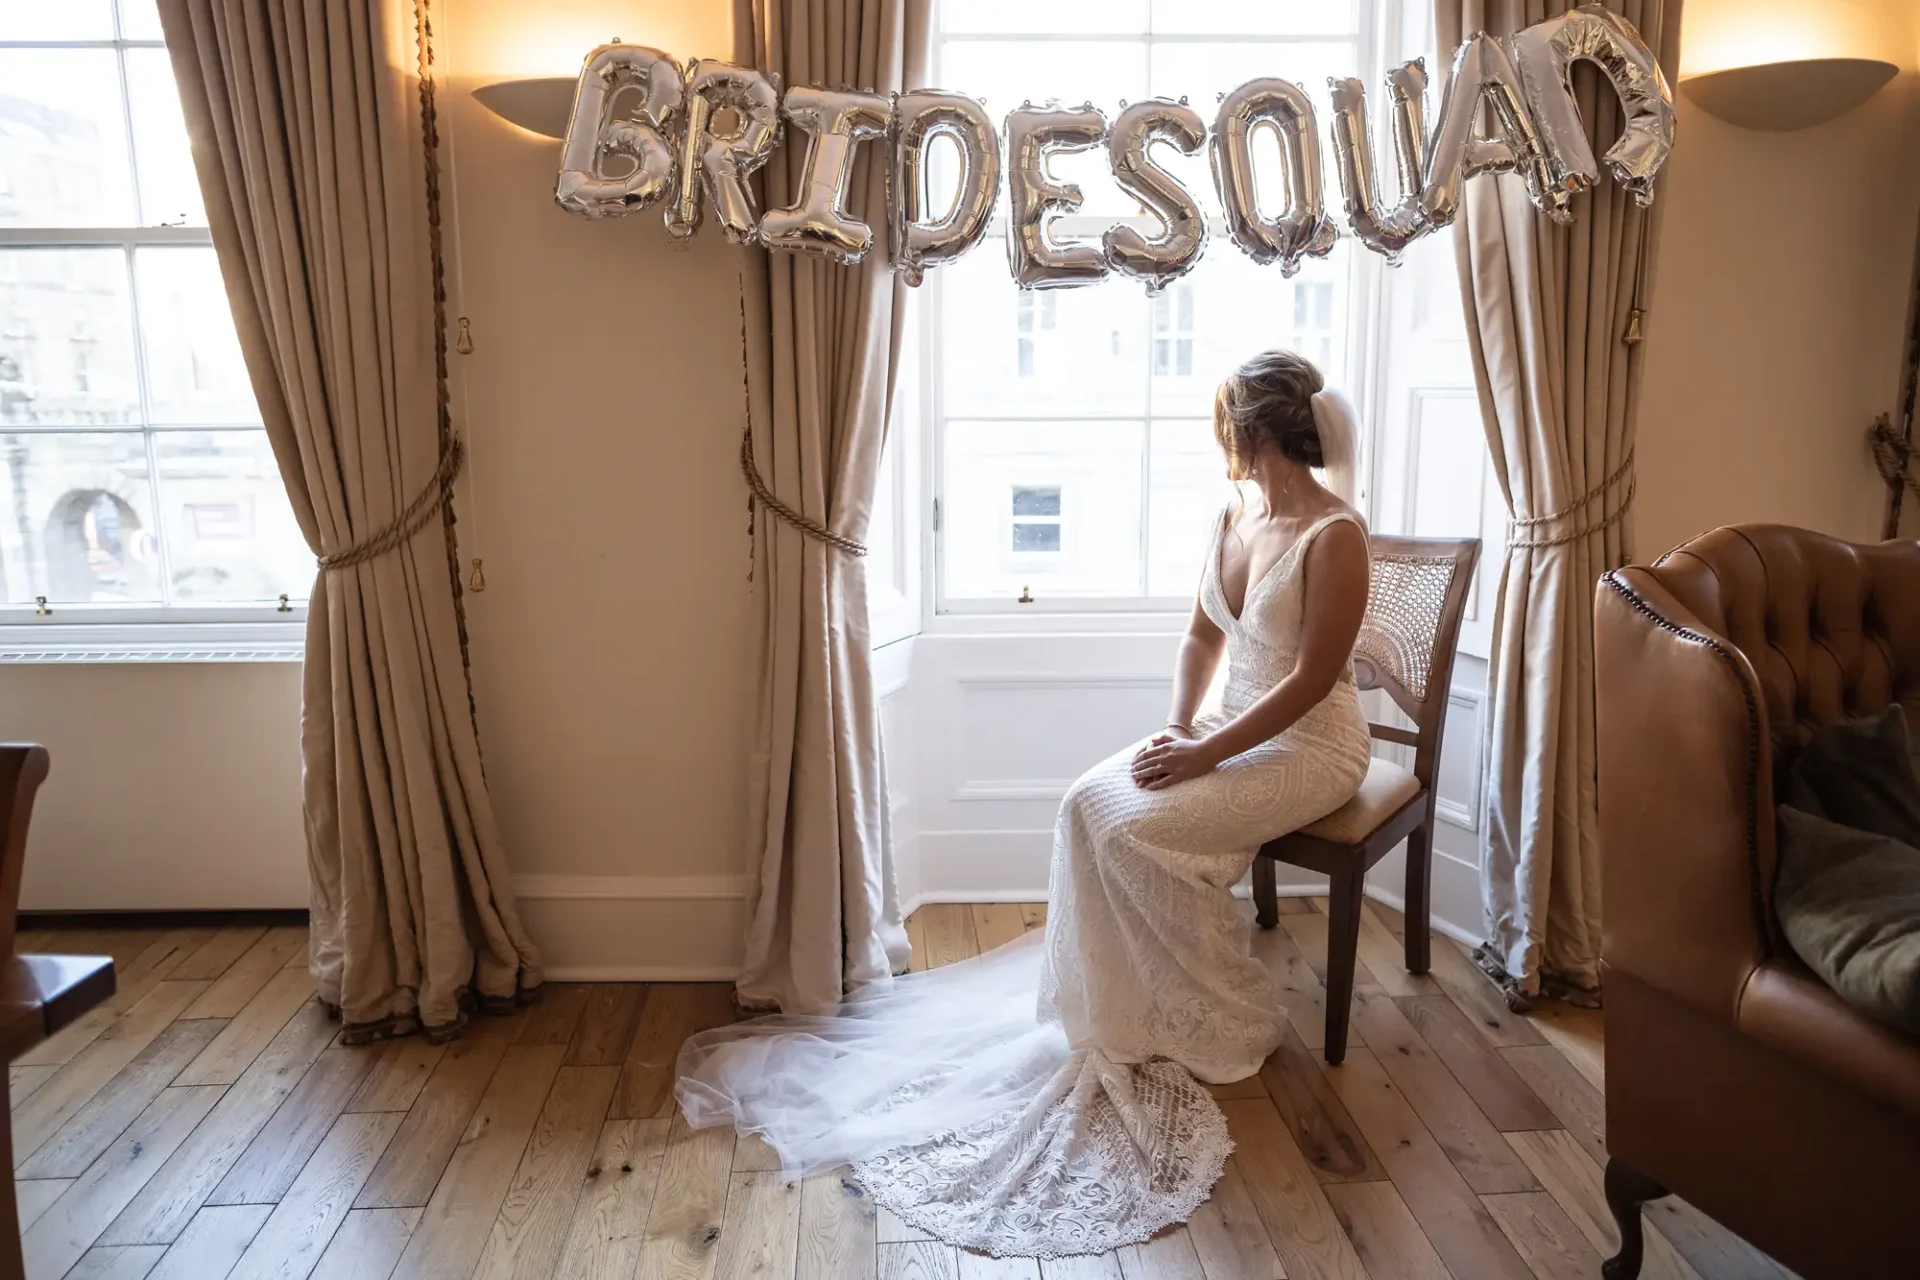 A bride in a long white dress sits pensively on a chair under a "bride squad" balloon sign, with large windows on either side in a well-lit room.